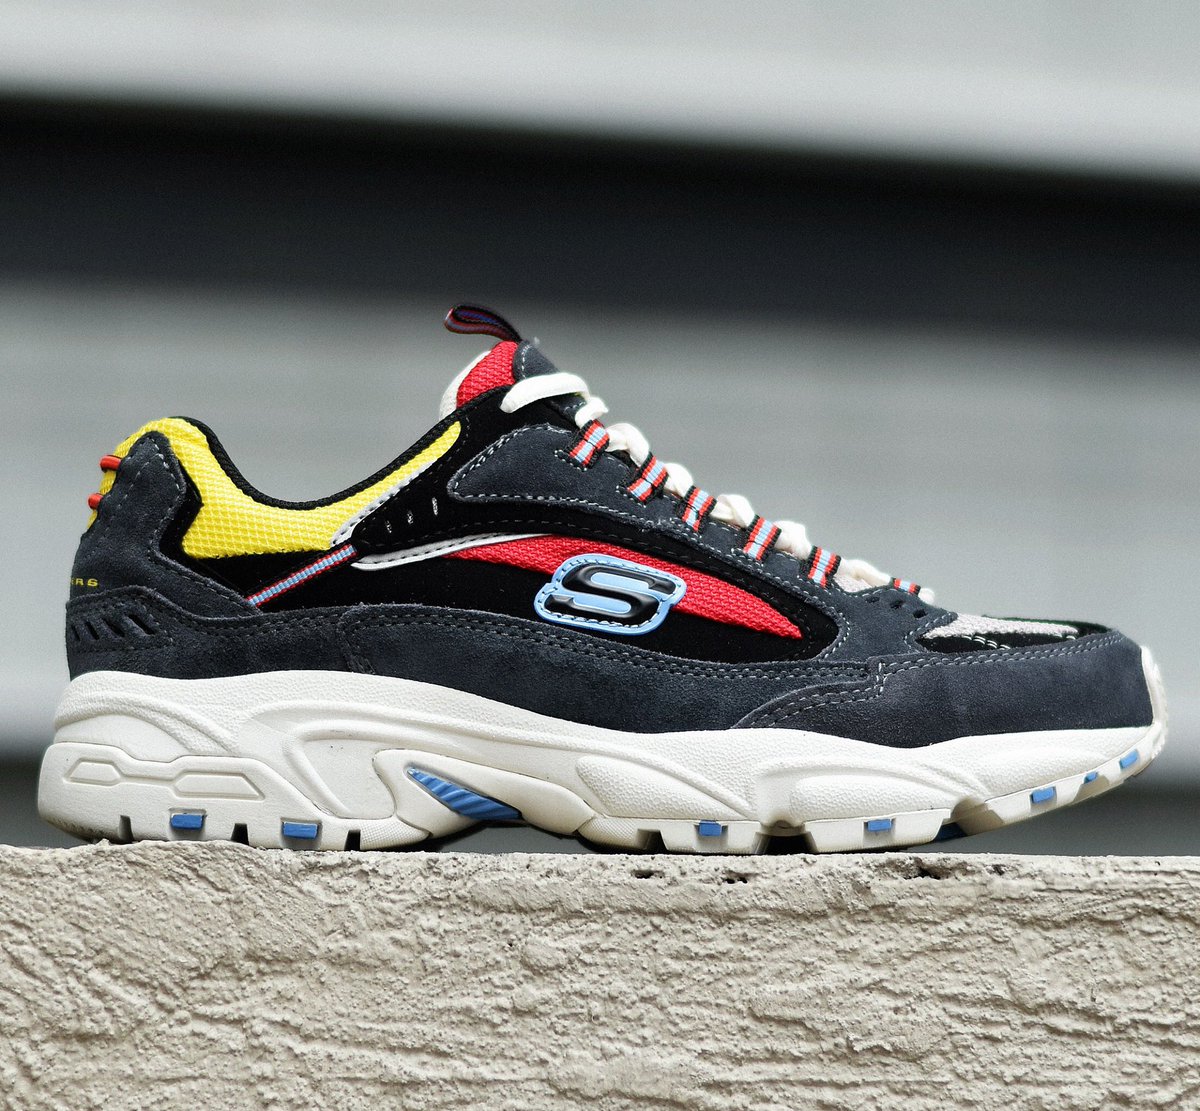 skechers 3 shoes philippines